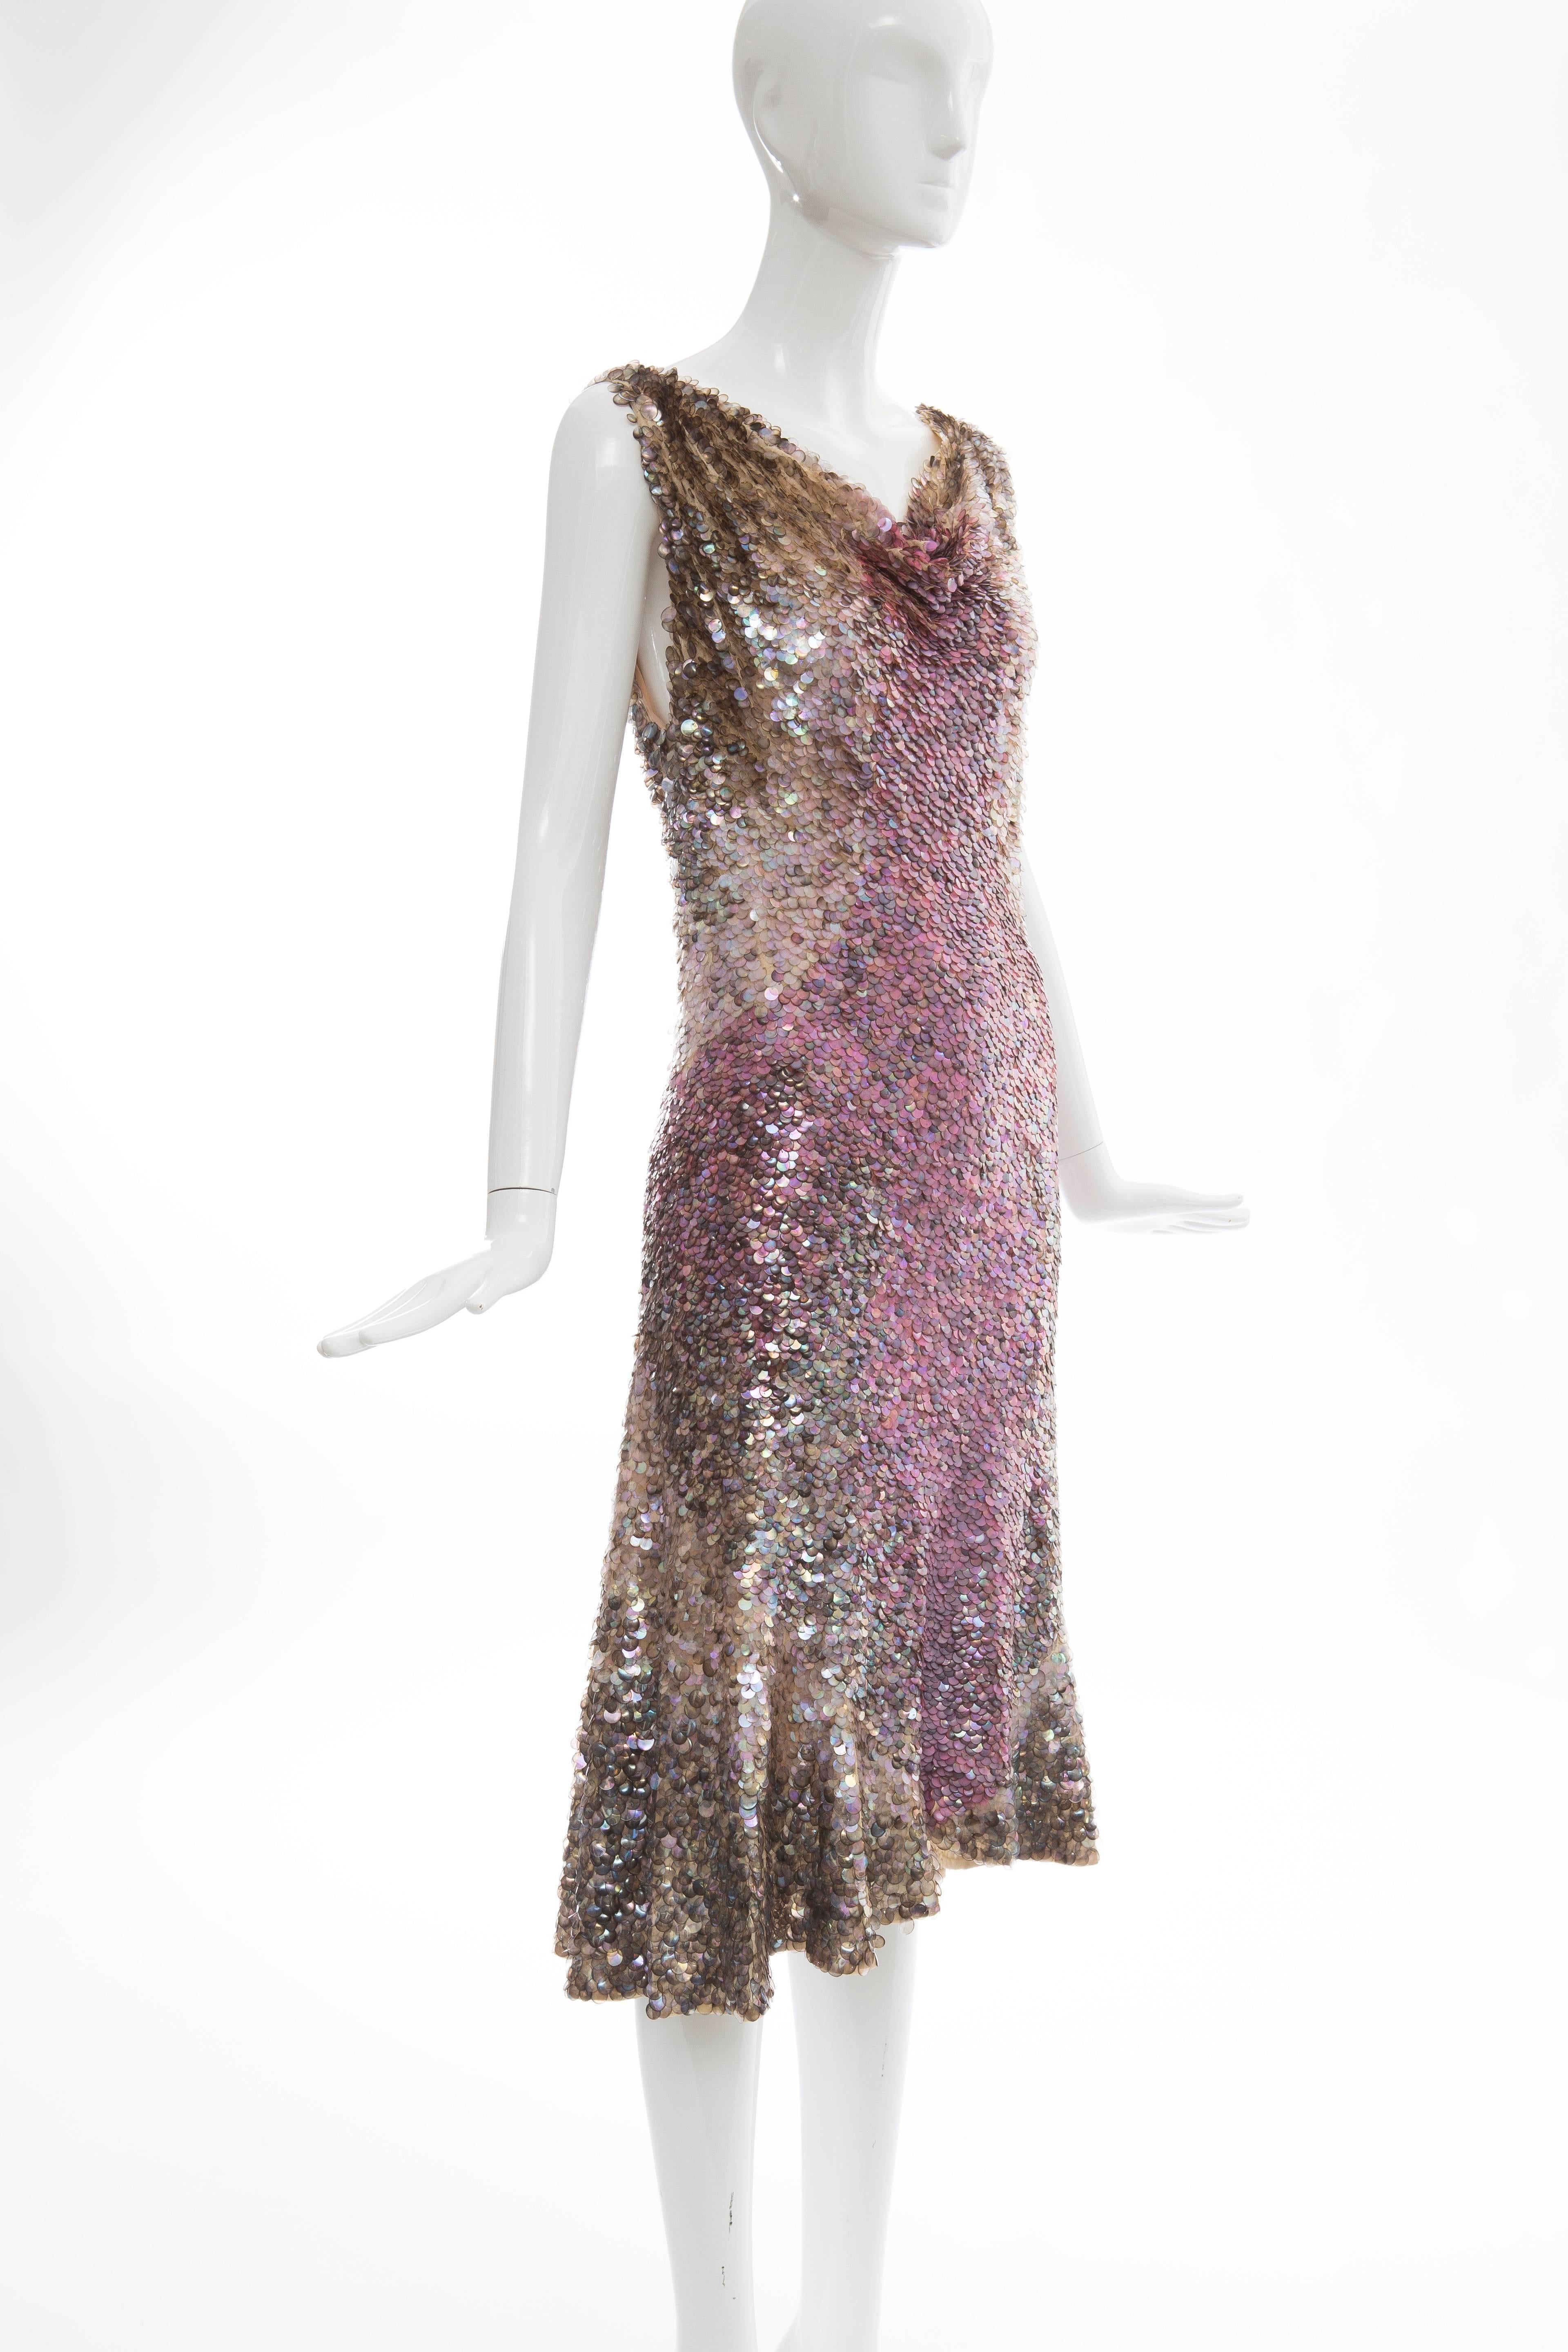 Zac Posen Runway Sleeveless Evening Dress Paillettes Flounce Hem, Spring 2004 In Excellent Condition For Sale In Cincinnati, OH